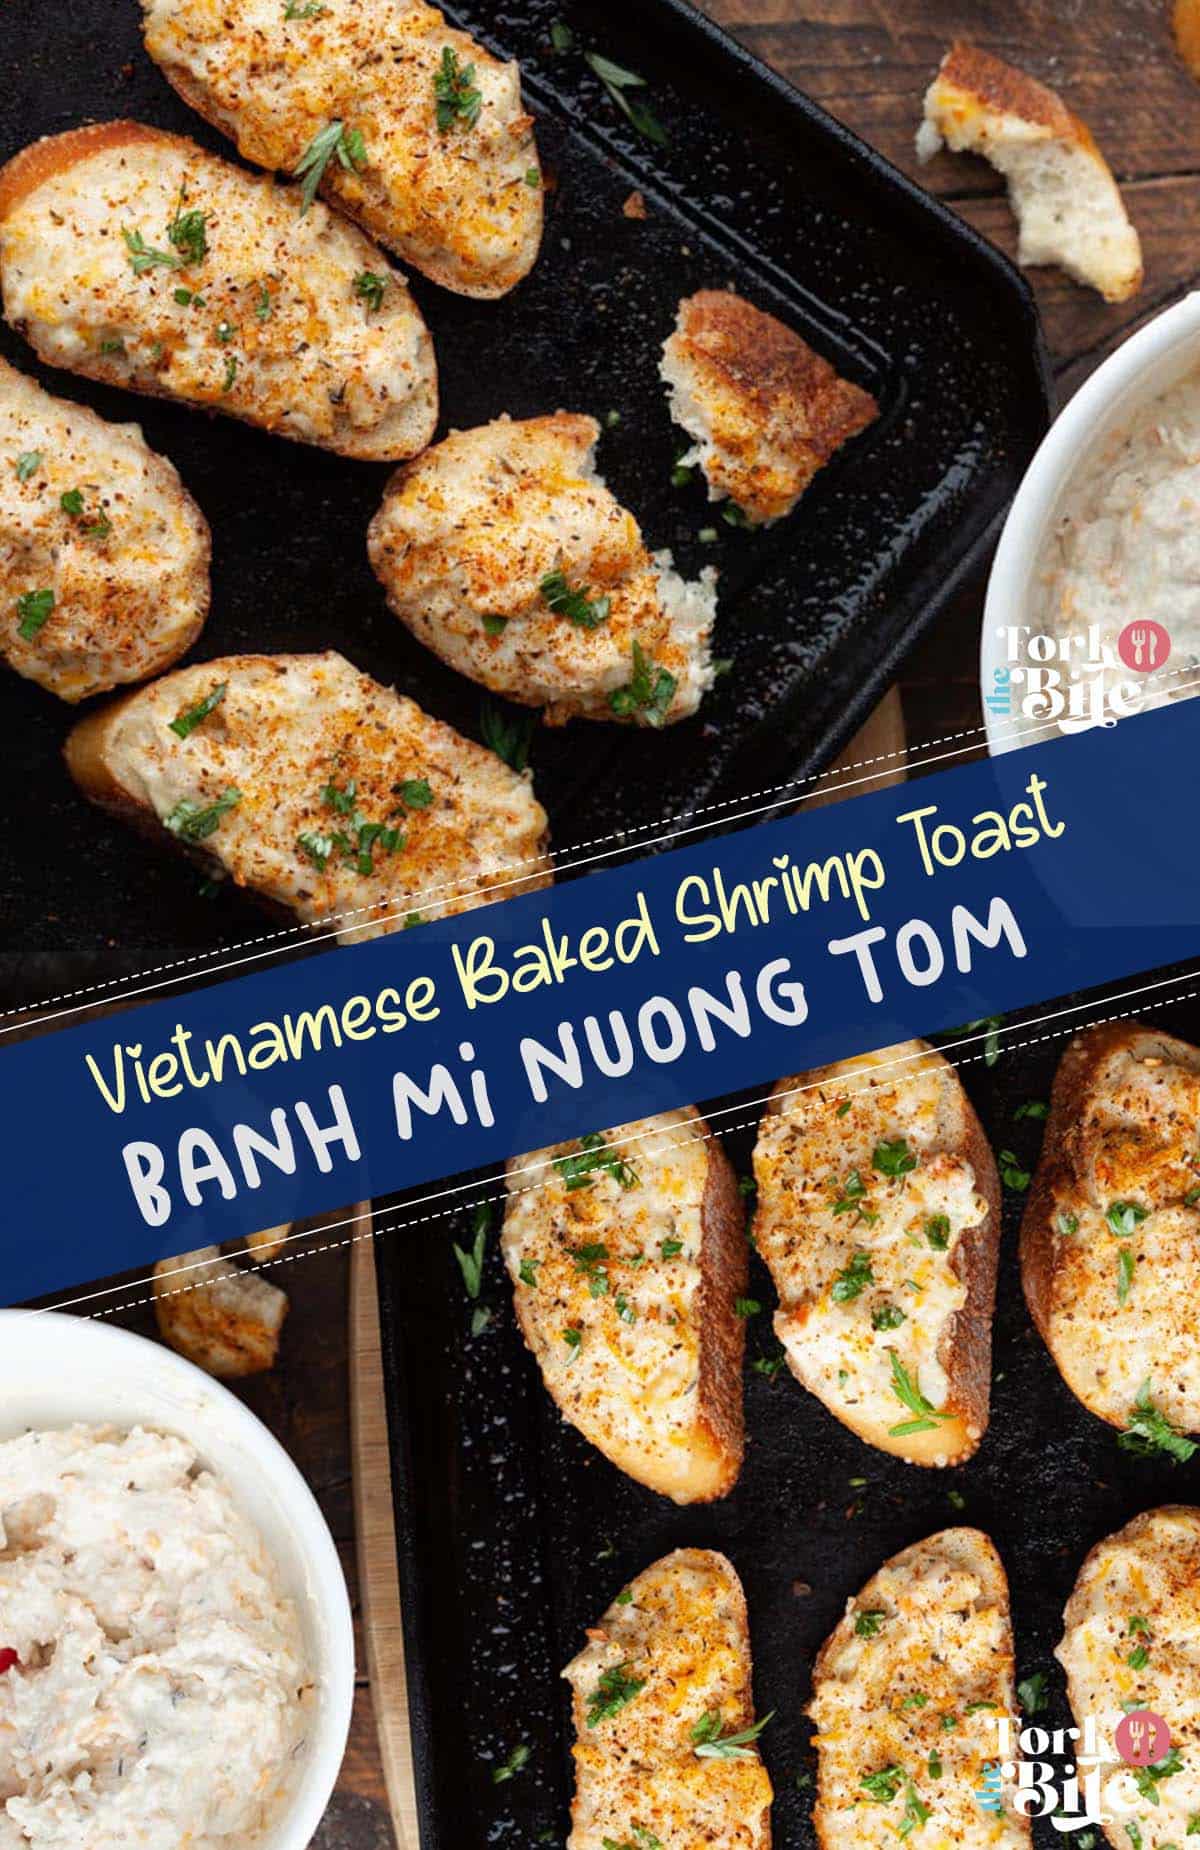 Looking for a delicious and easy seafood recipe? Try Banh Mi Noung Tom, a Vietnamese-style shrimp toast that's creamy, savory, and satisfying.